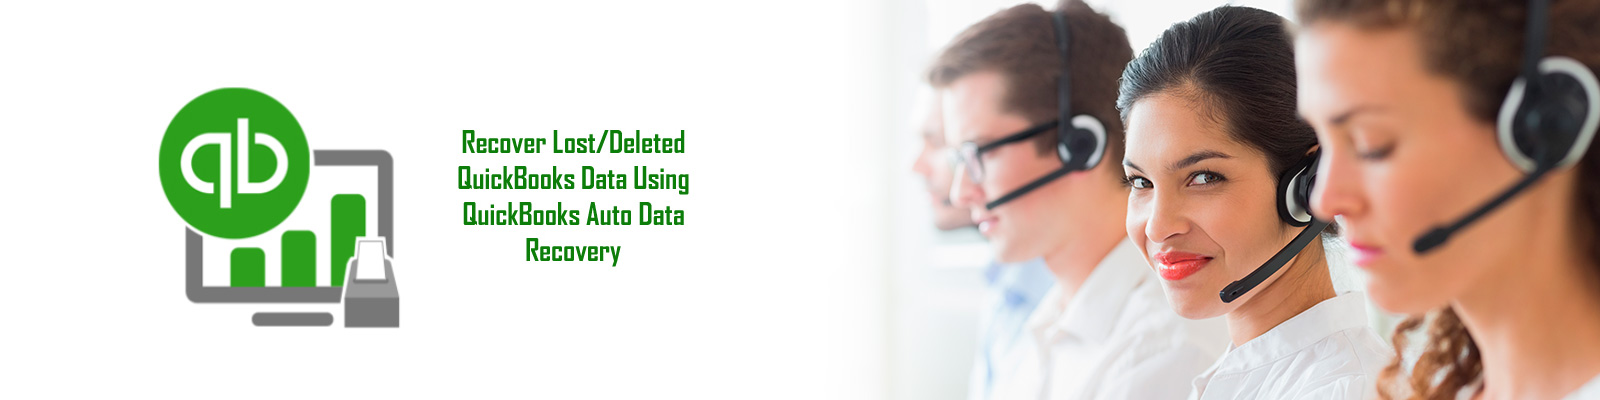 Use this third party tool for recover and restore quickbooks instanty without any hassle.